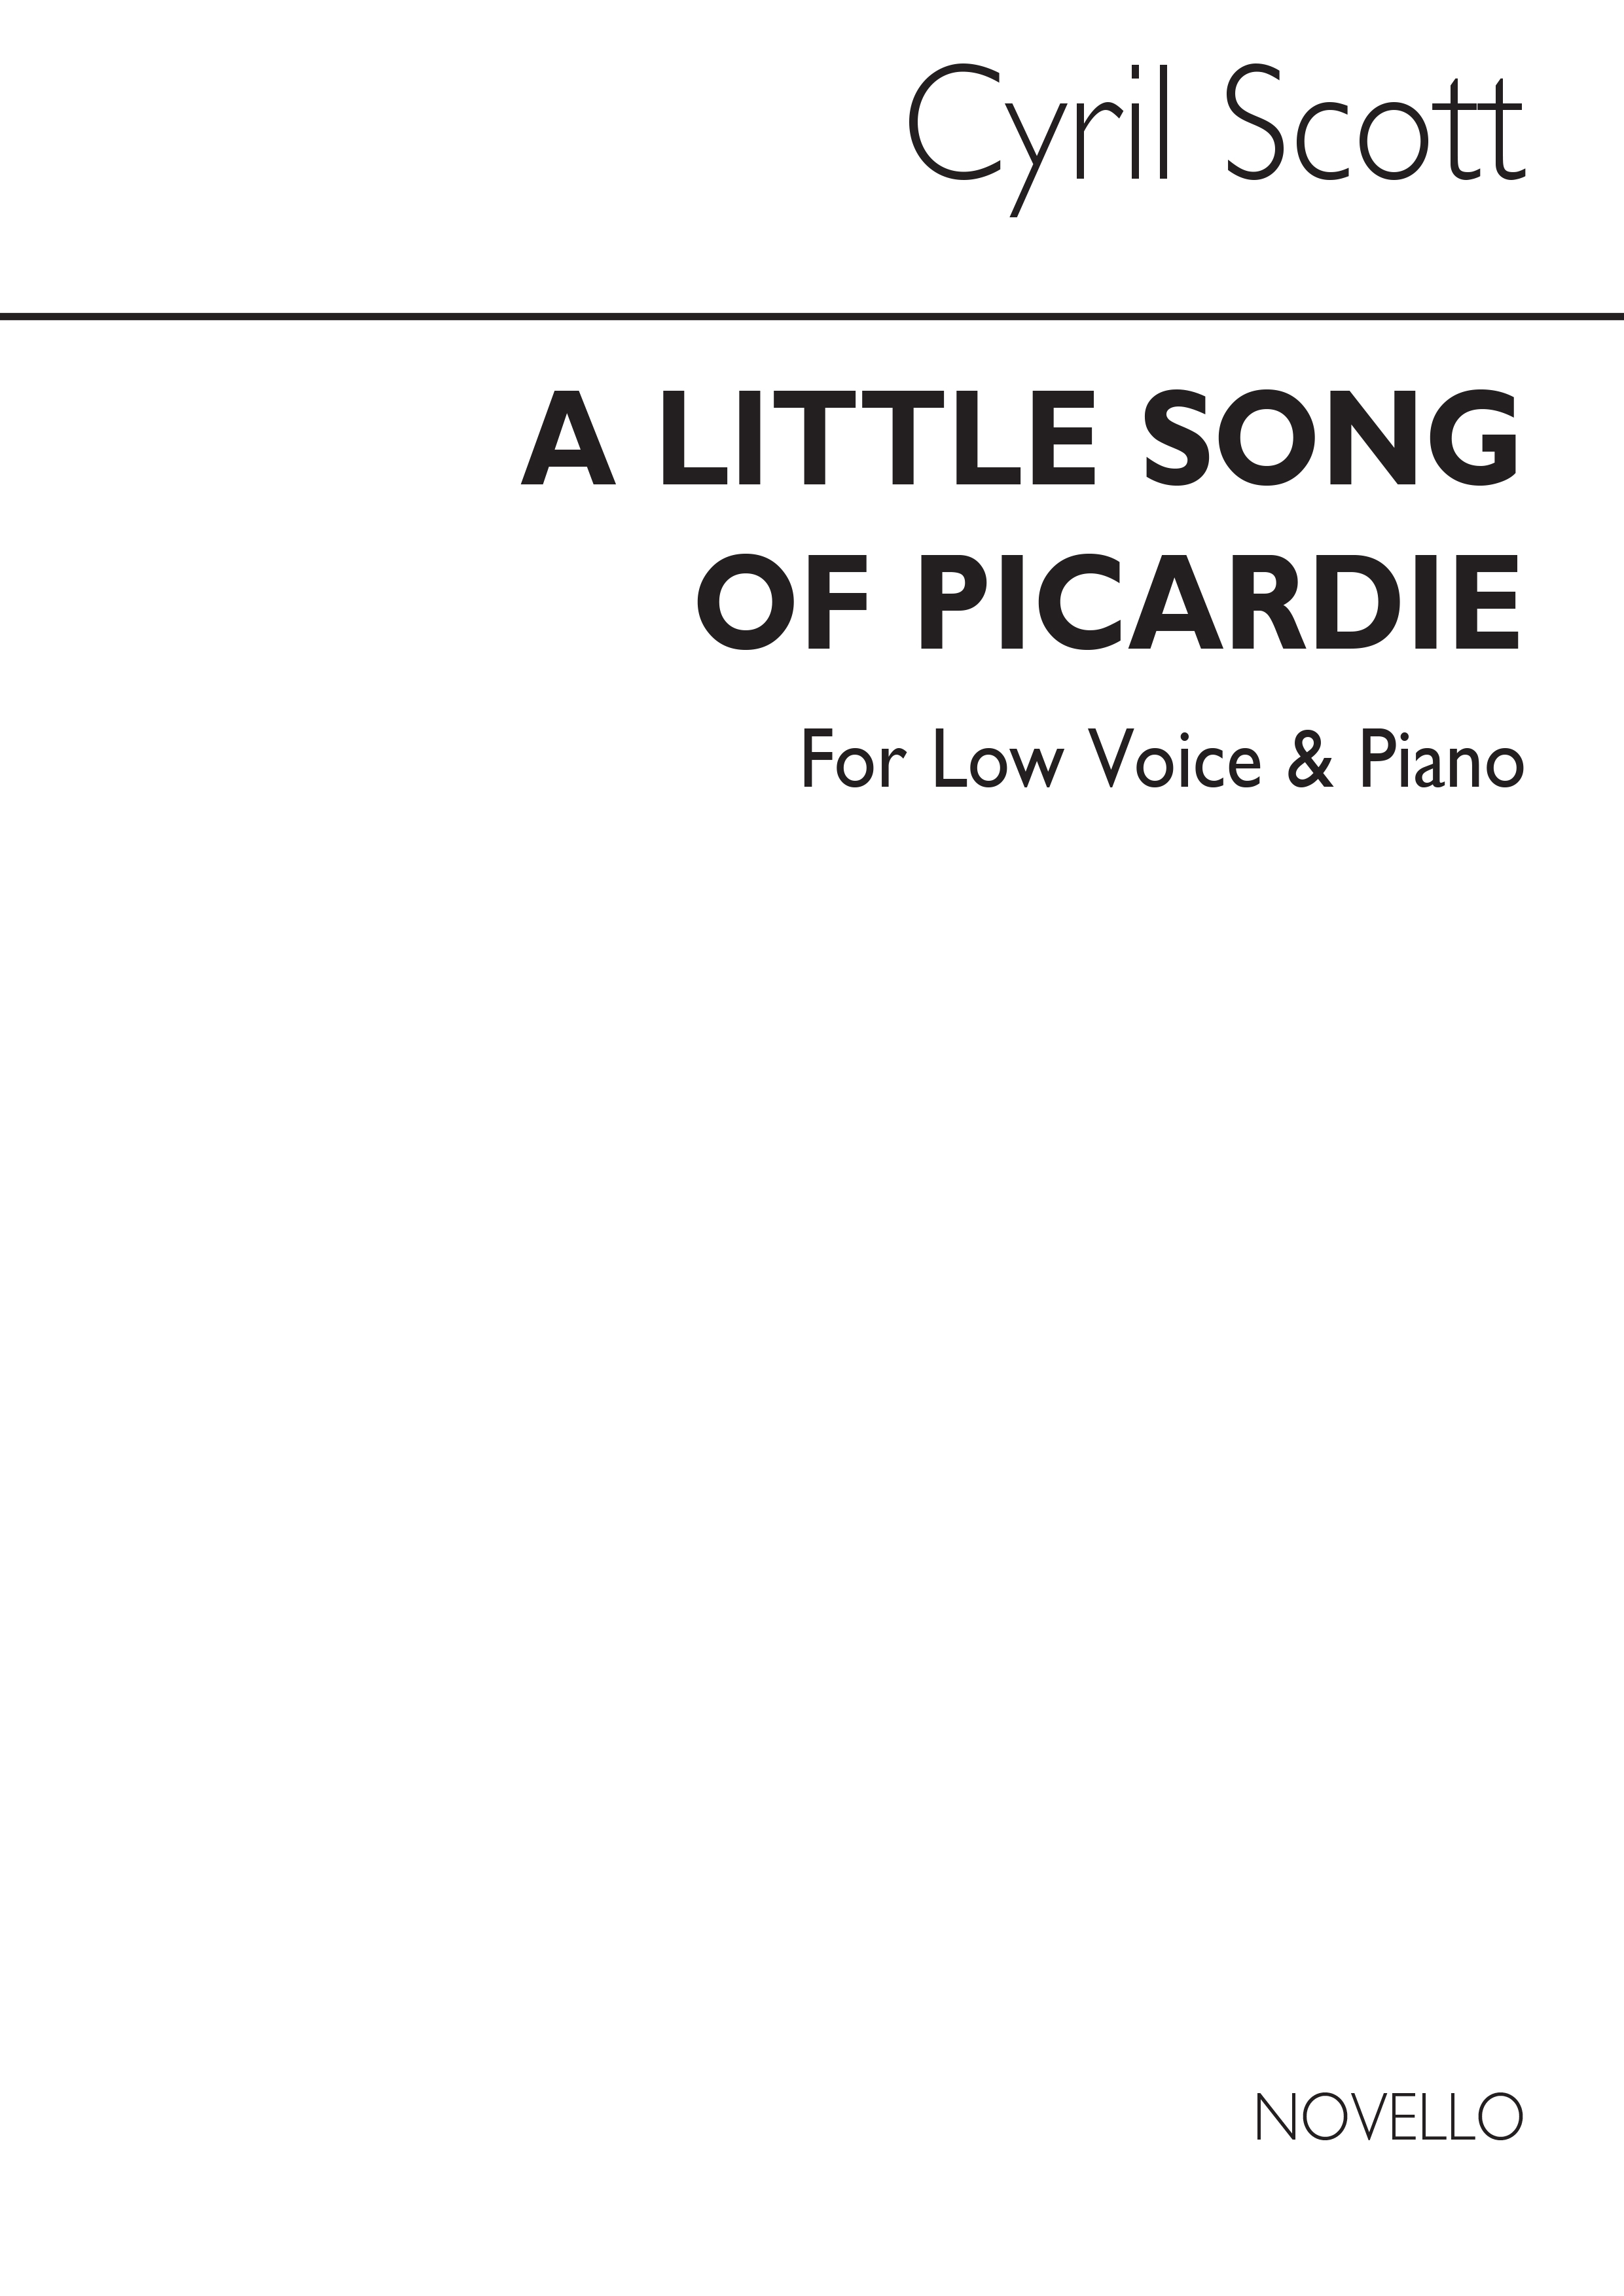 Cyril Scott: The Little Song Of Picardie-low Voice/Piano (Key-d)